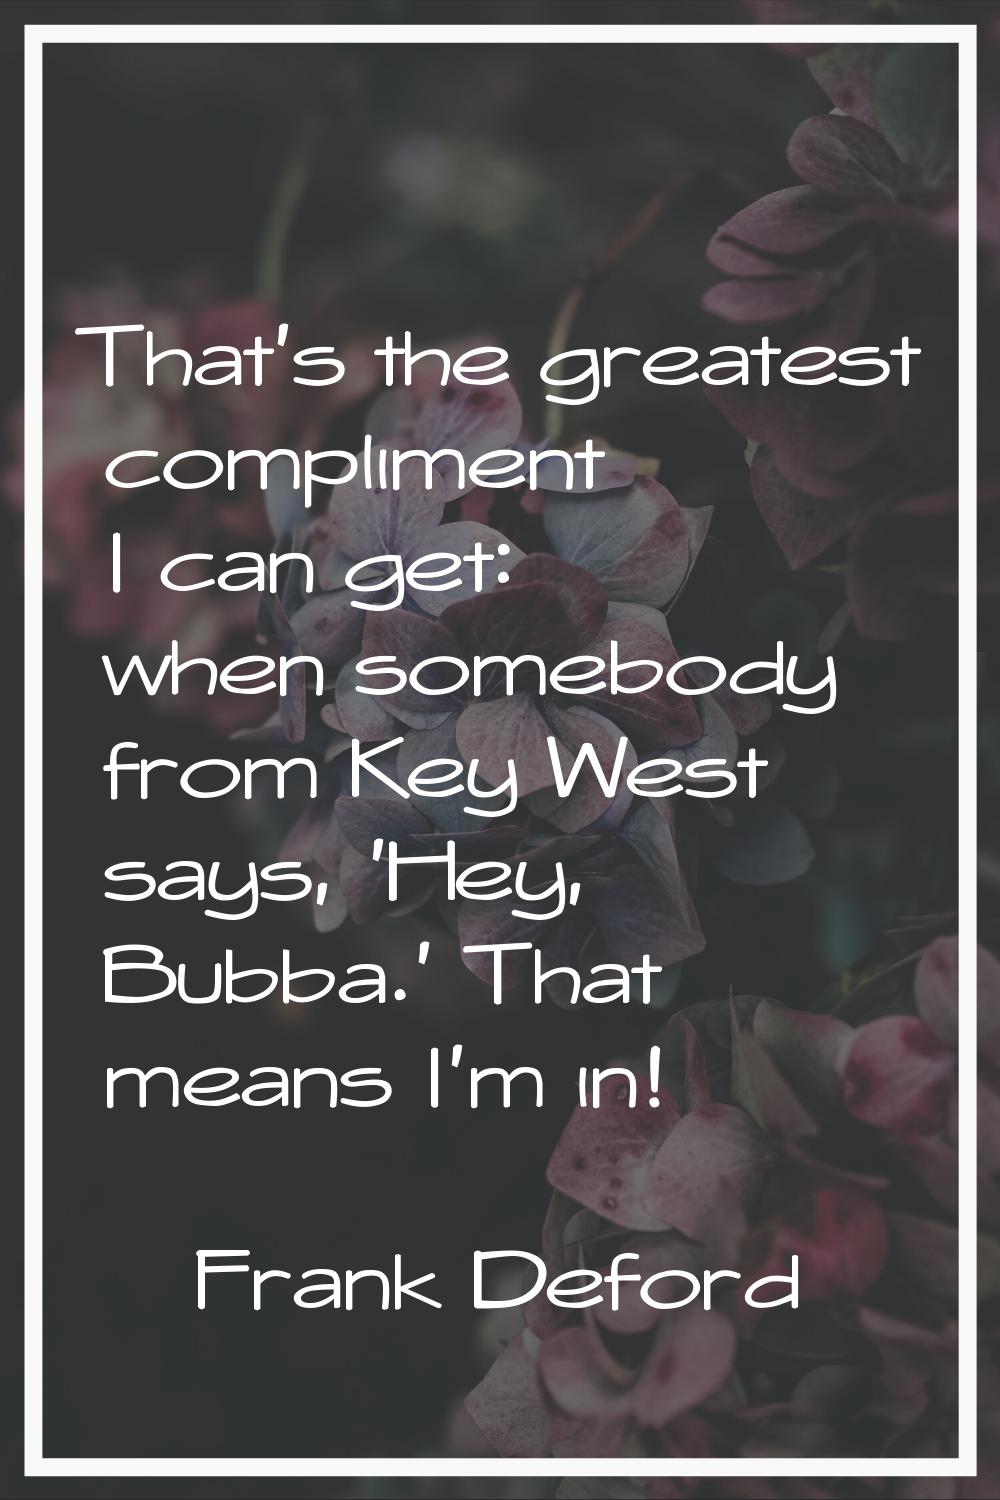 That's the greatest compliment I can get: when somebody from Key West says, 'Hey, Bubba.' That mean